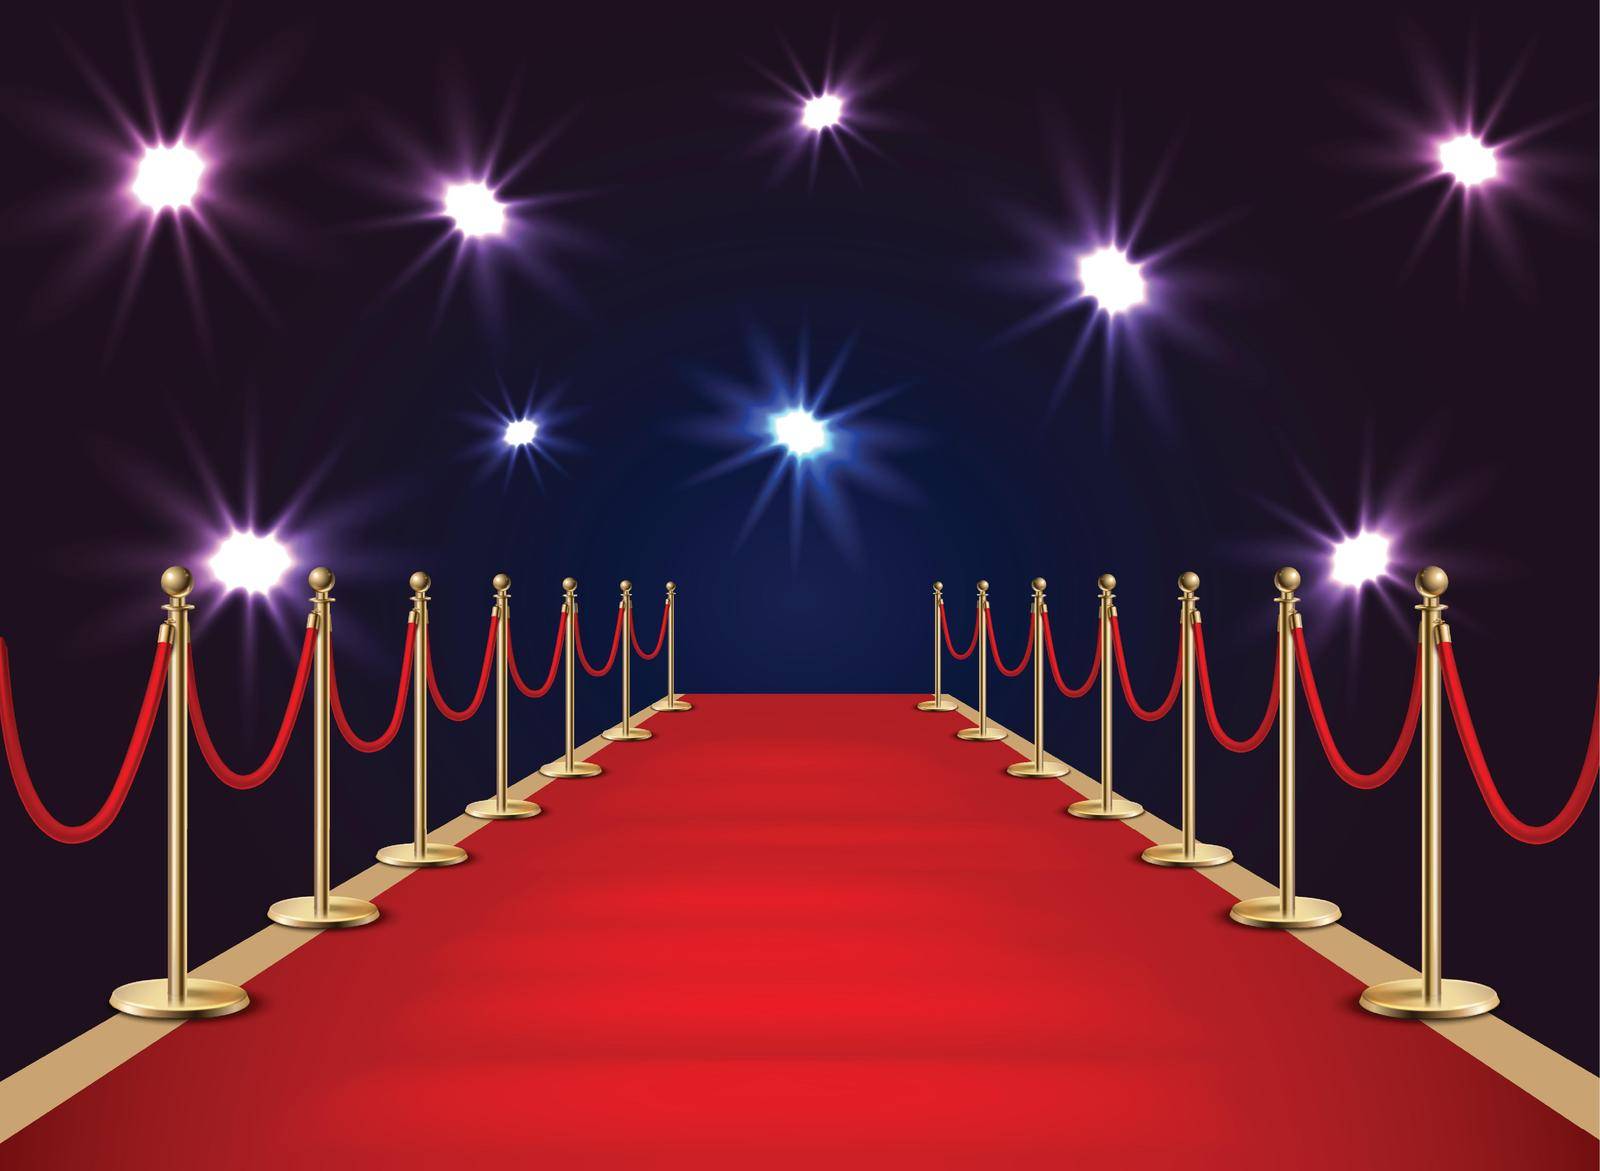 Red carpet and golden barriers realistic 3d vector illustration. VIP event, luxury celebration. Celebrity party entrance.  Grand opening. Cinema premiere. illustration - Vector.